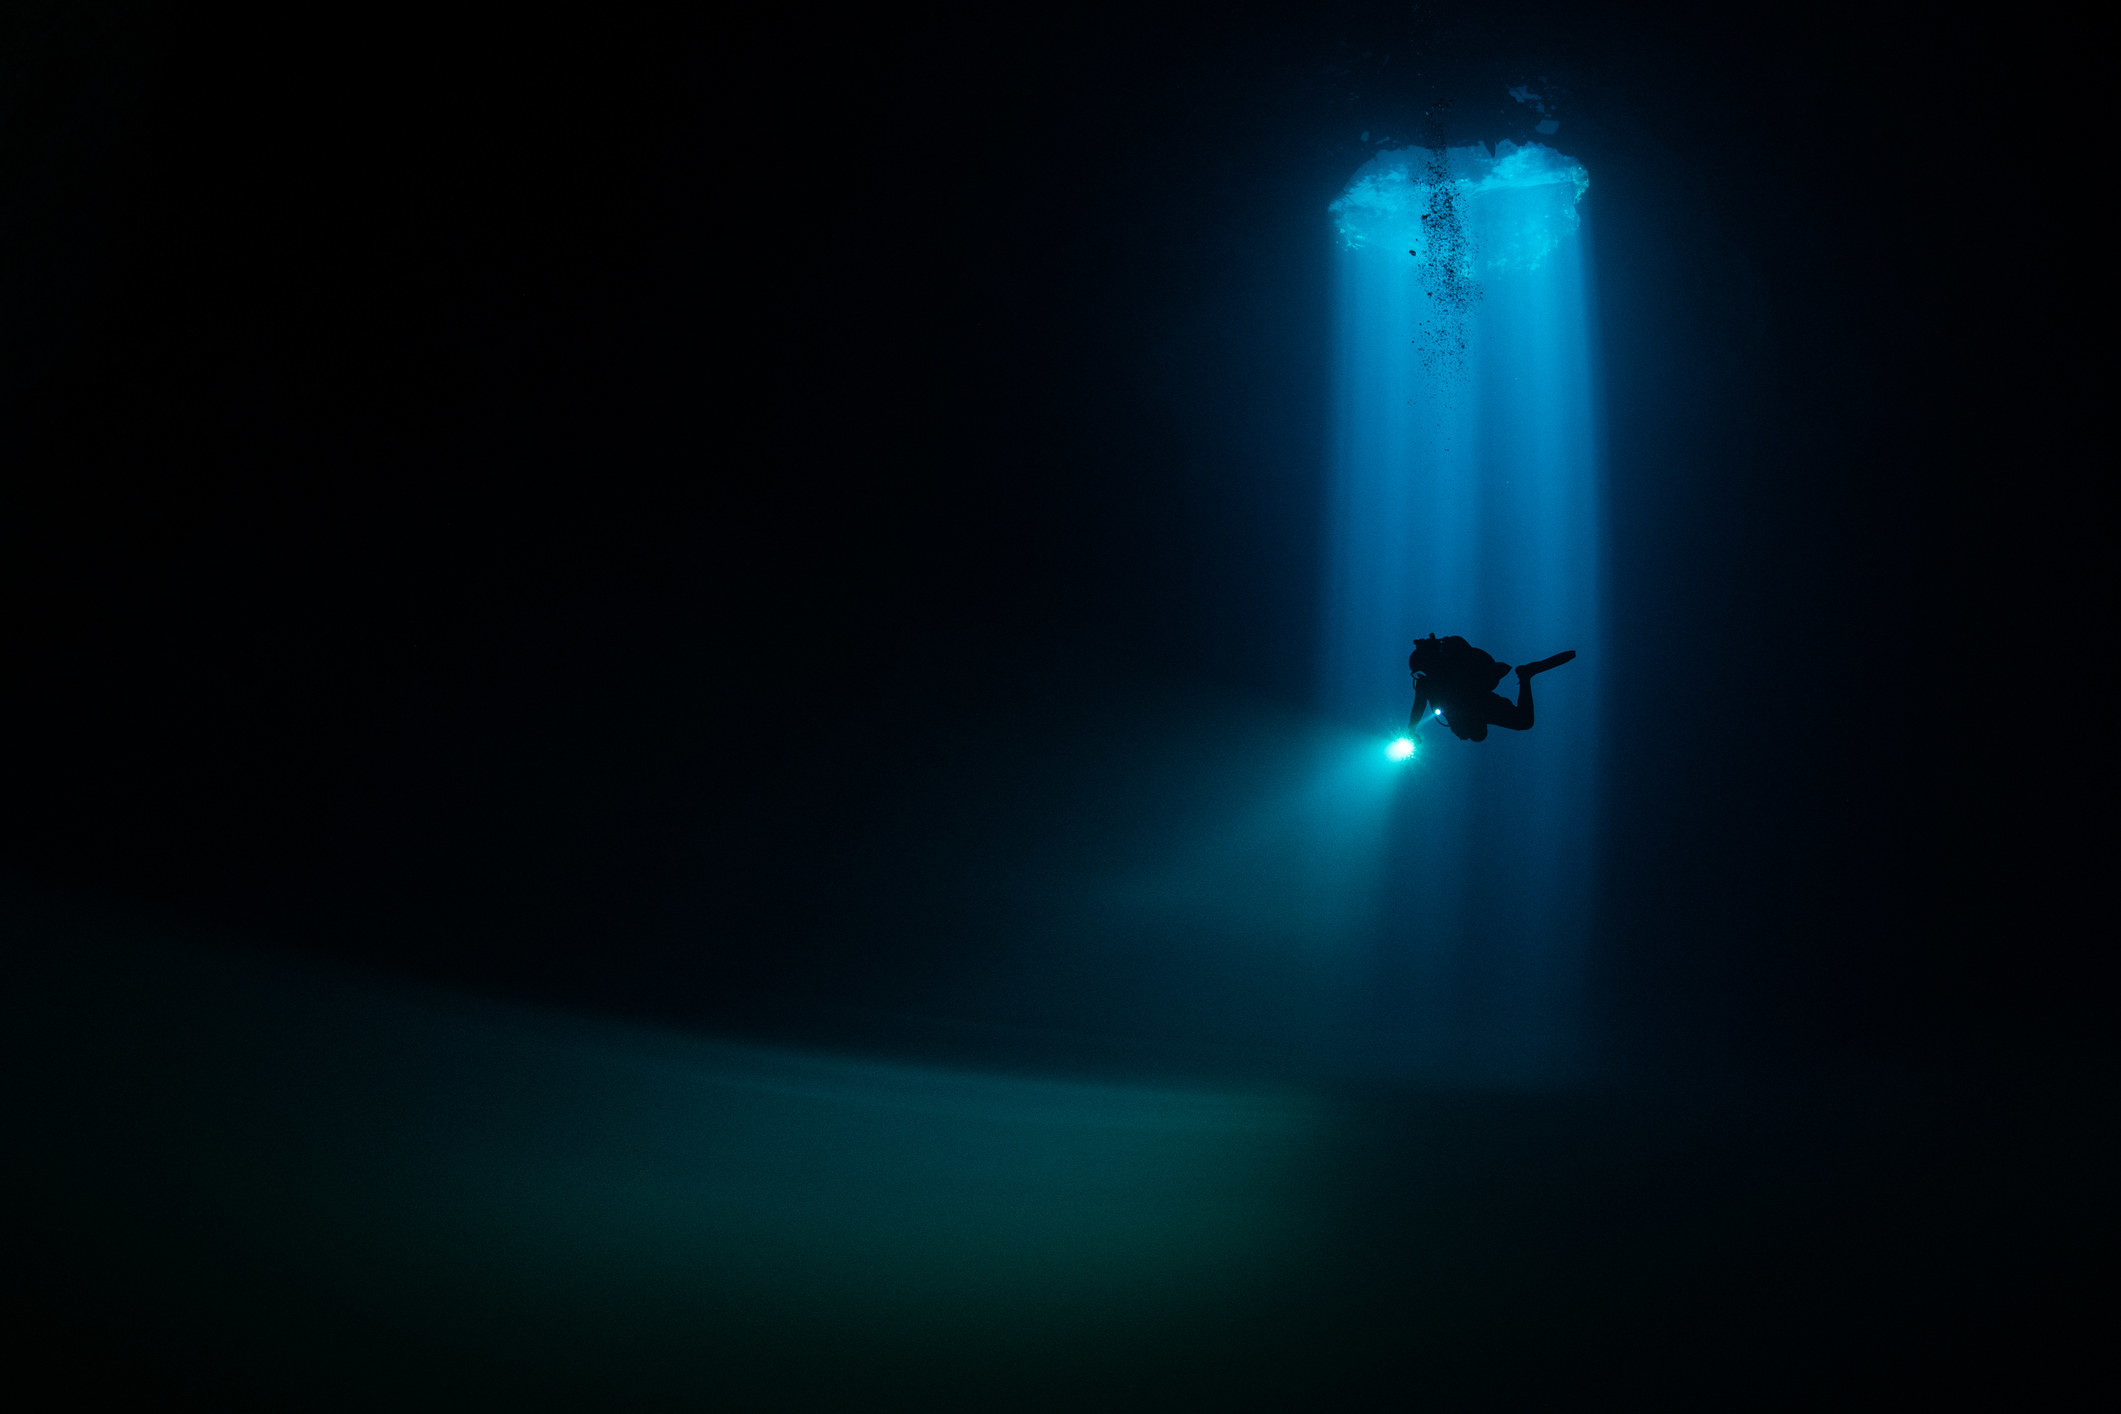 A lone diver highlighted underwater